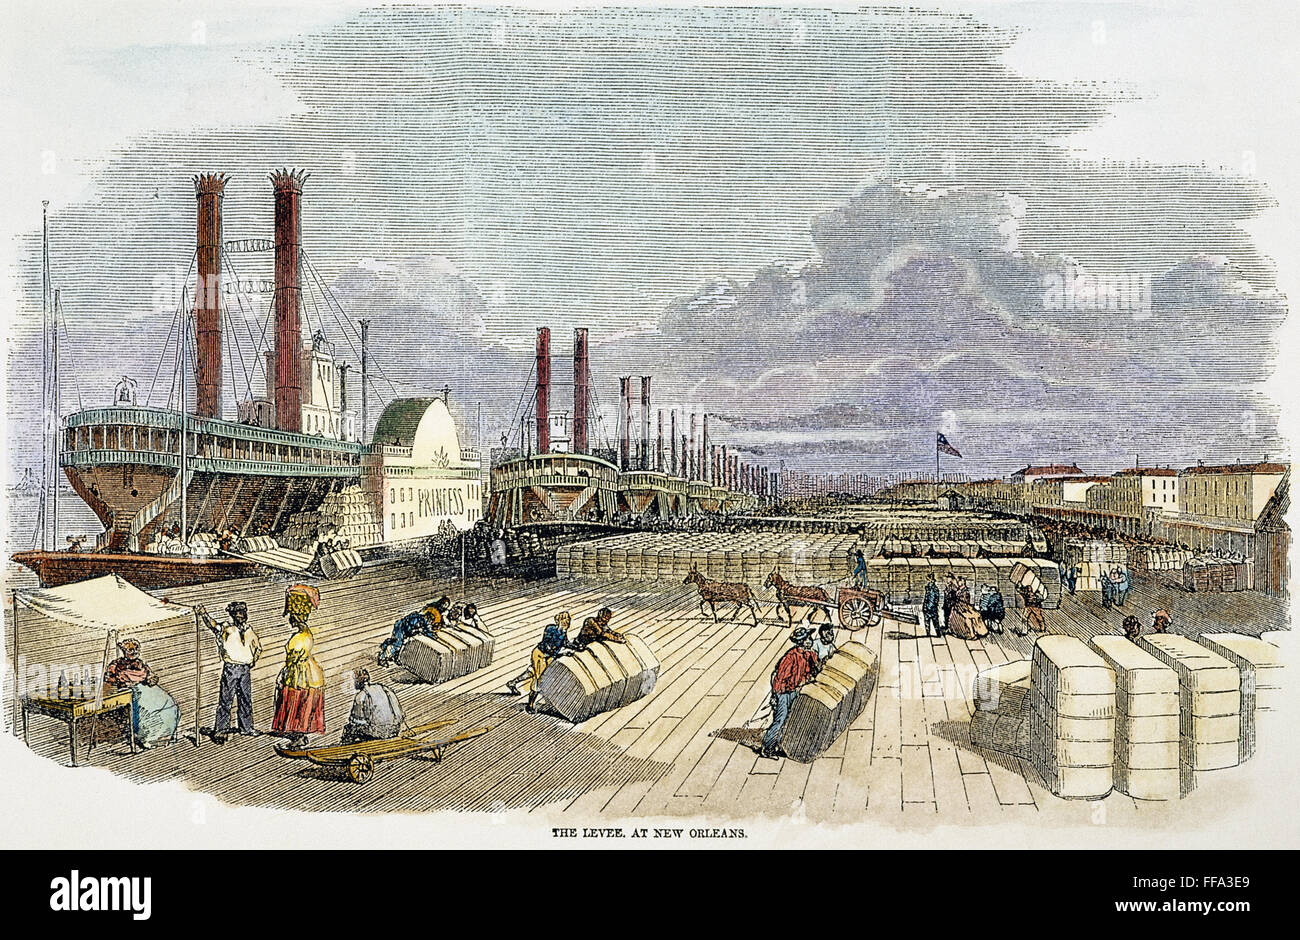 NEW ORLEANS LEVEE, 1858. /nBales of cotton being unloaded from riverboats on the levee at New Orleans, Louisiana. Wood engraving, English, 1858. Stock Photo